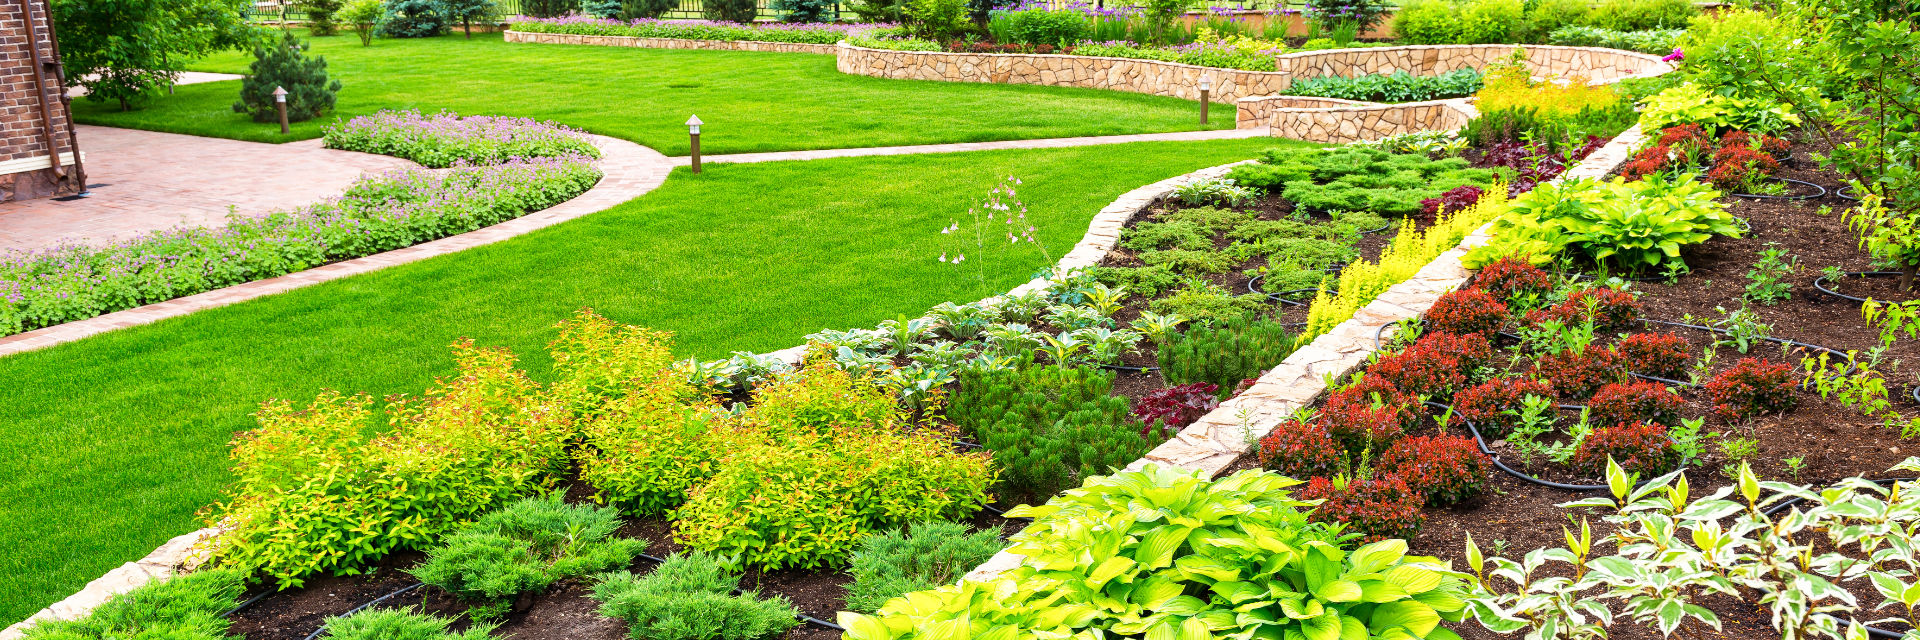 Professionally landscaped and maintained garden with hardscapes and a manicured lawn.